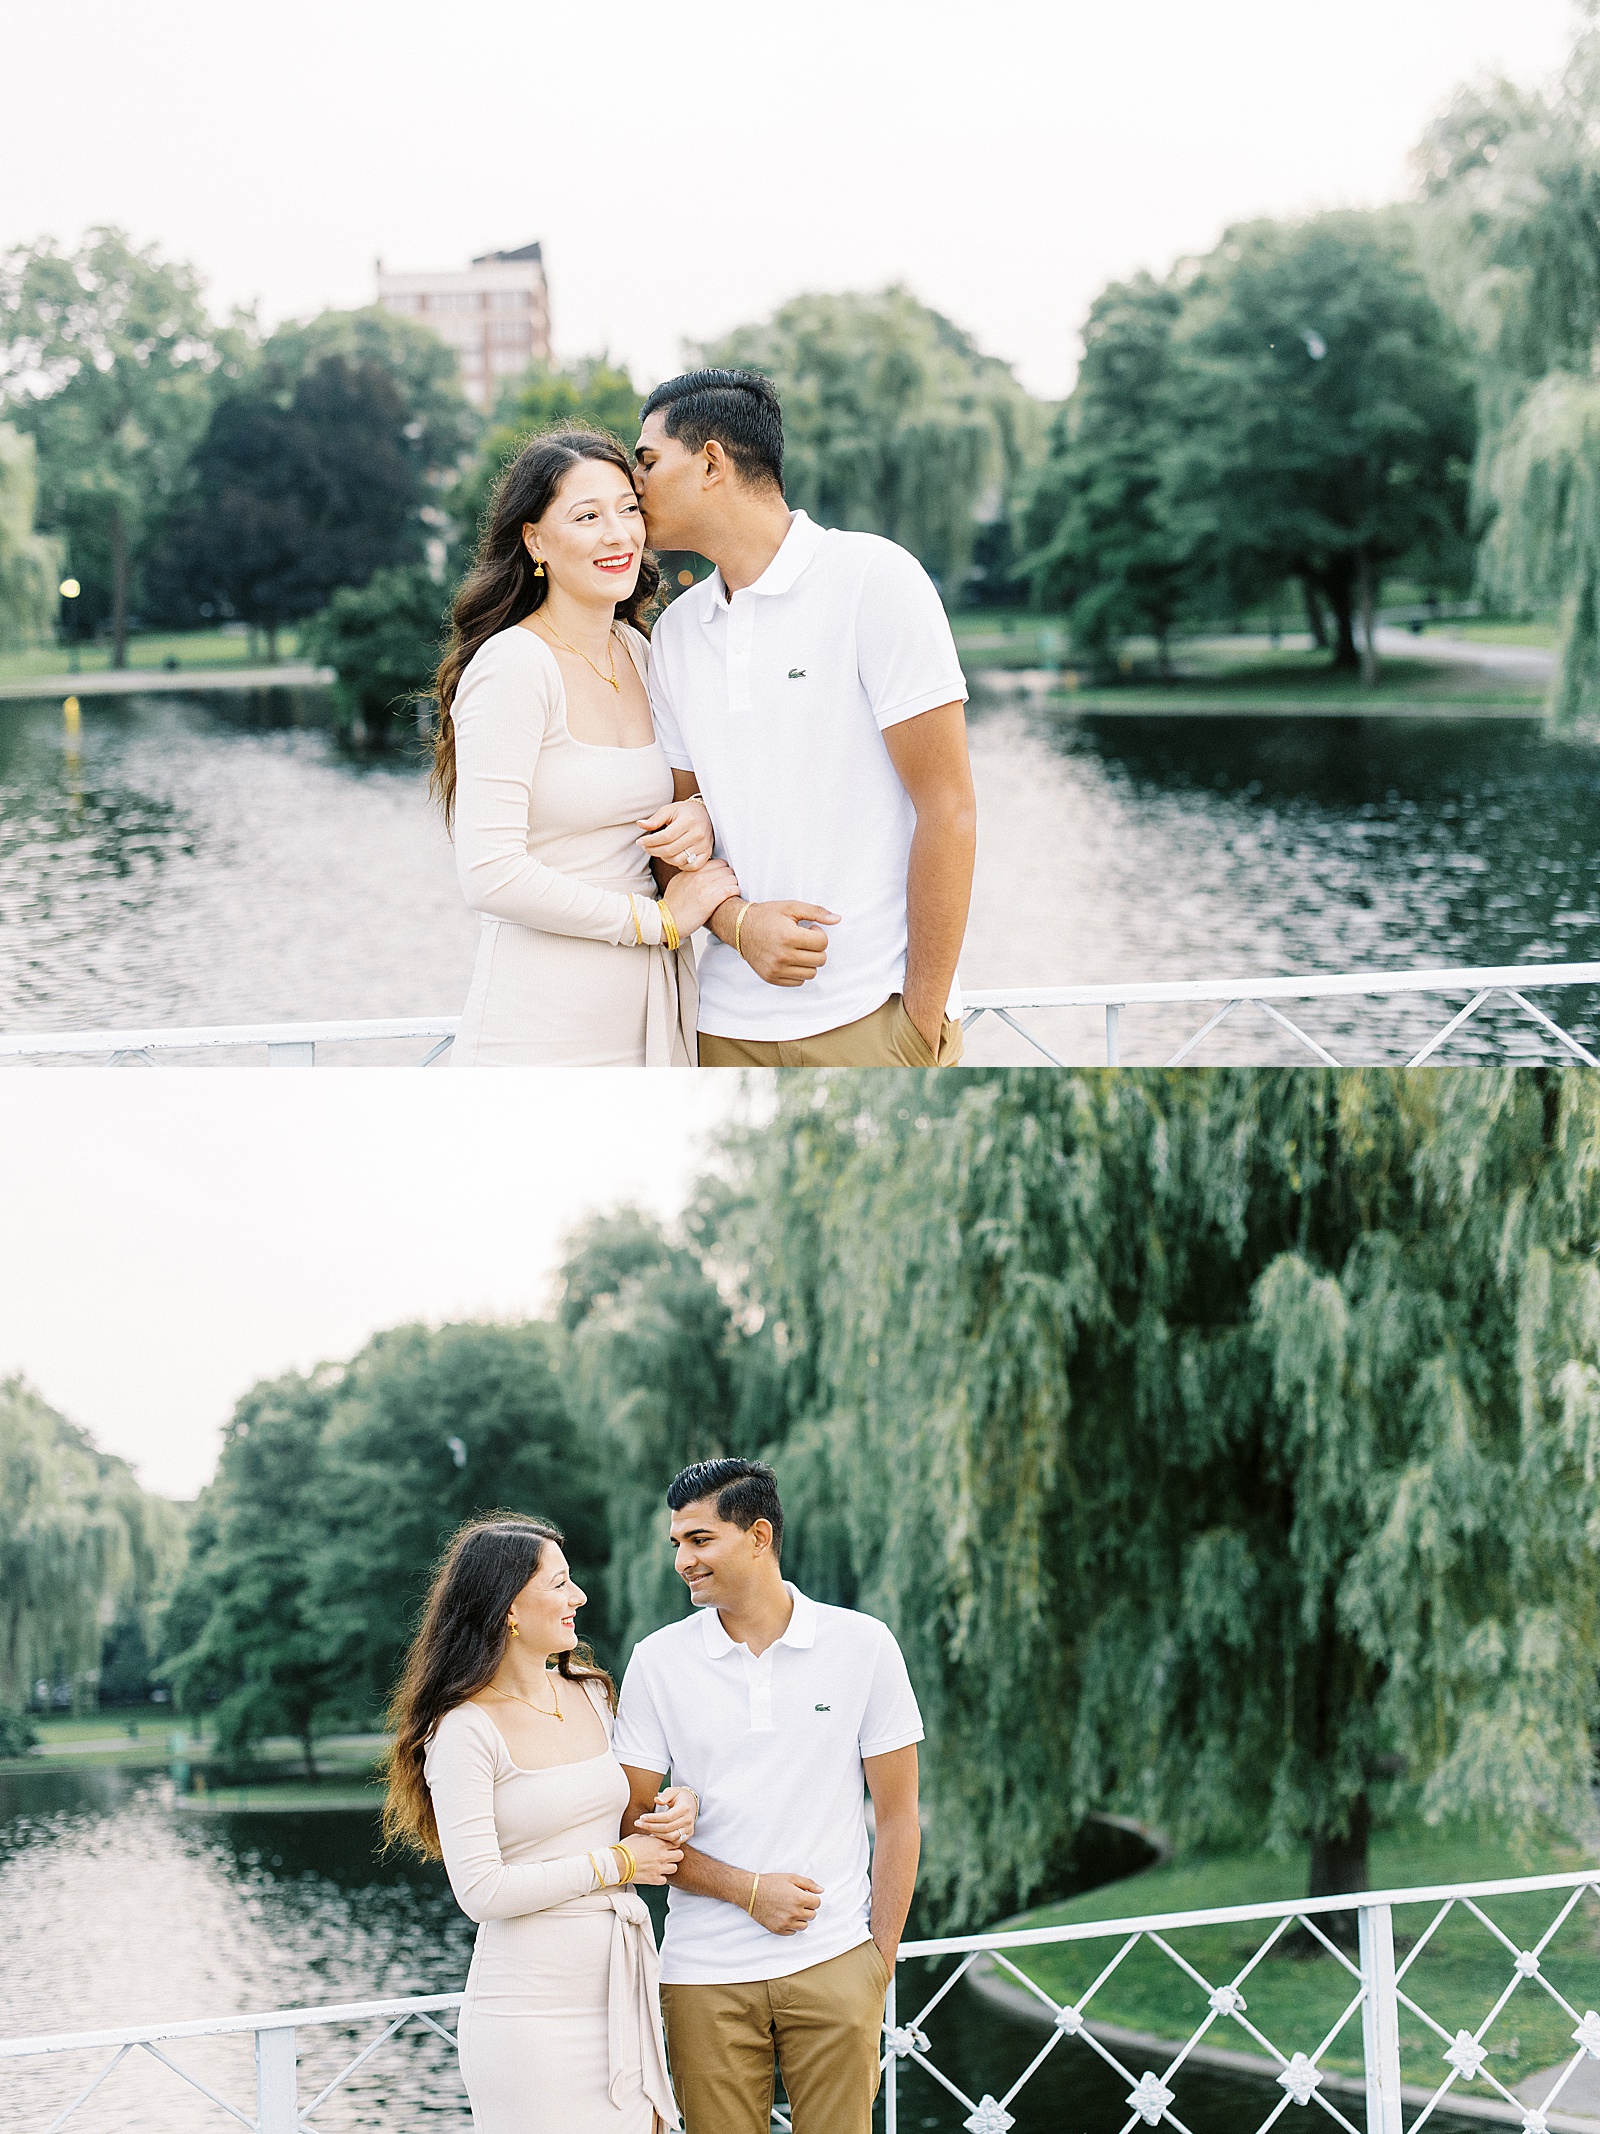 Man in polo whispering in fiancé's ear next to pond at public garden engagement session